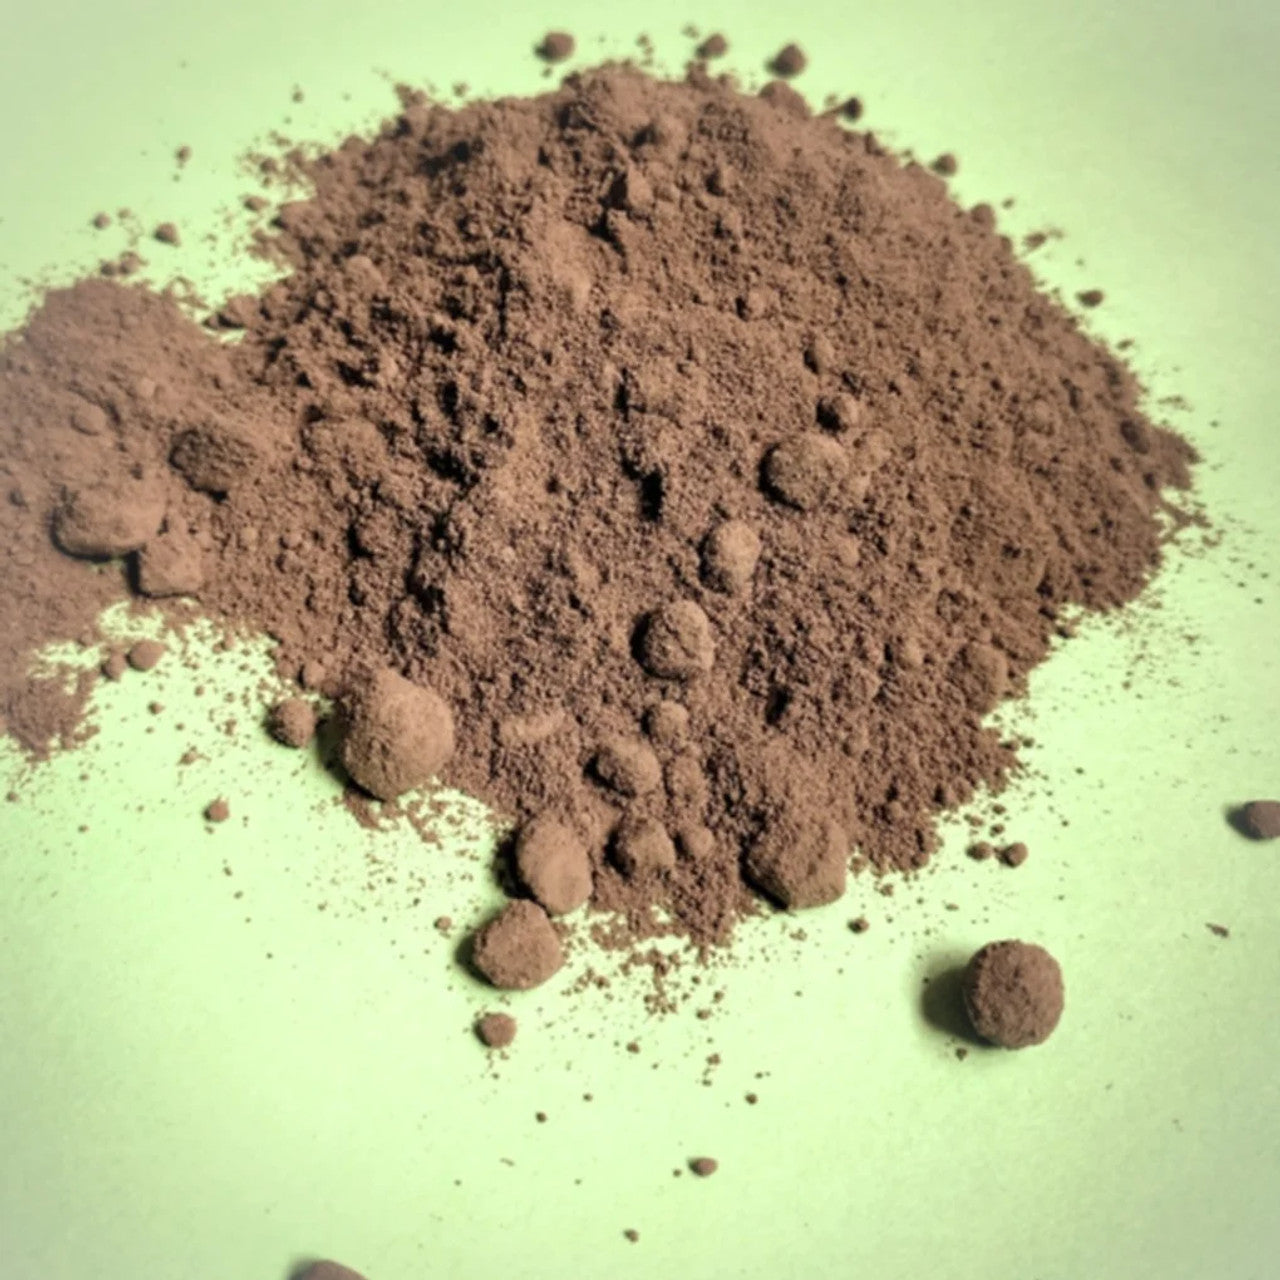 CocoaSupply Grand Guayacan - 10/12 Dutched (alkalized) Cacao Powder